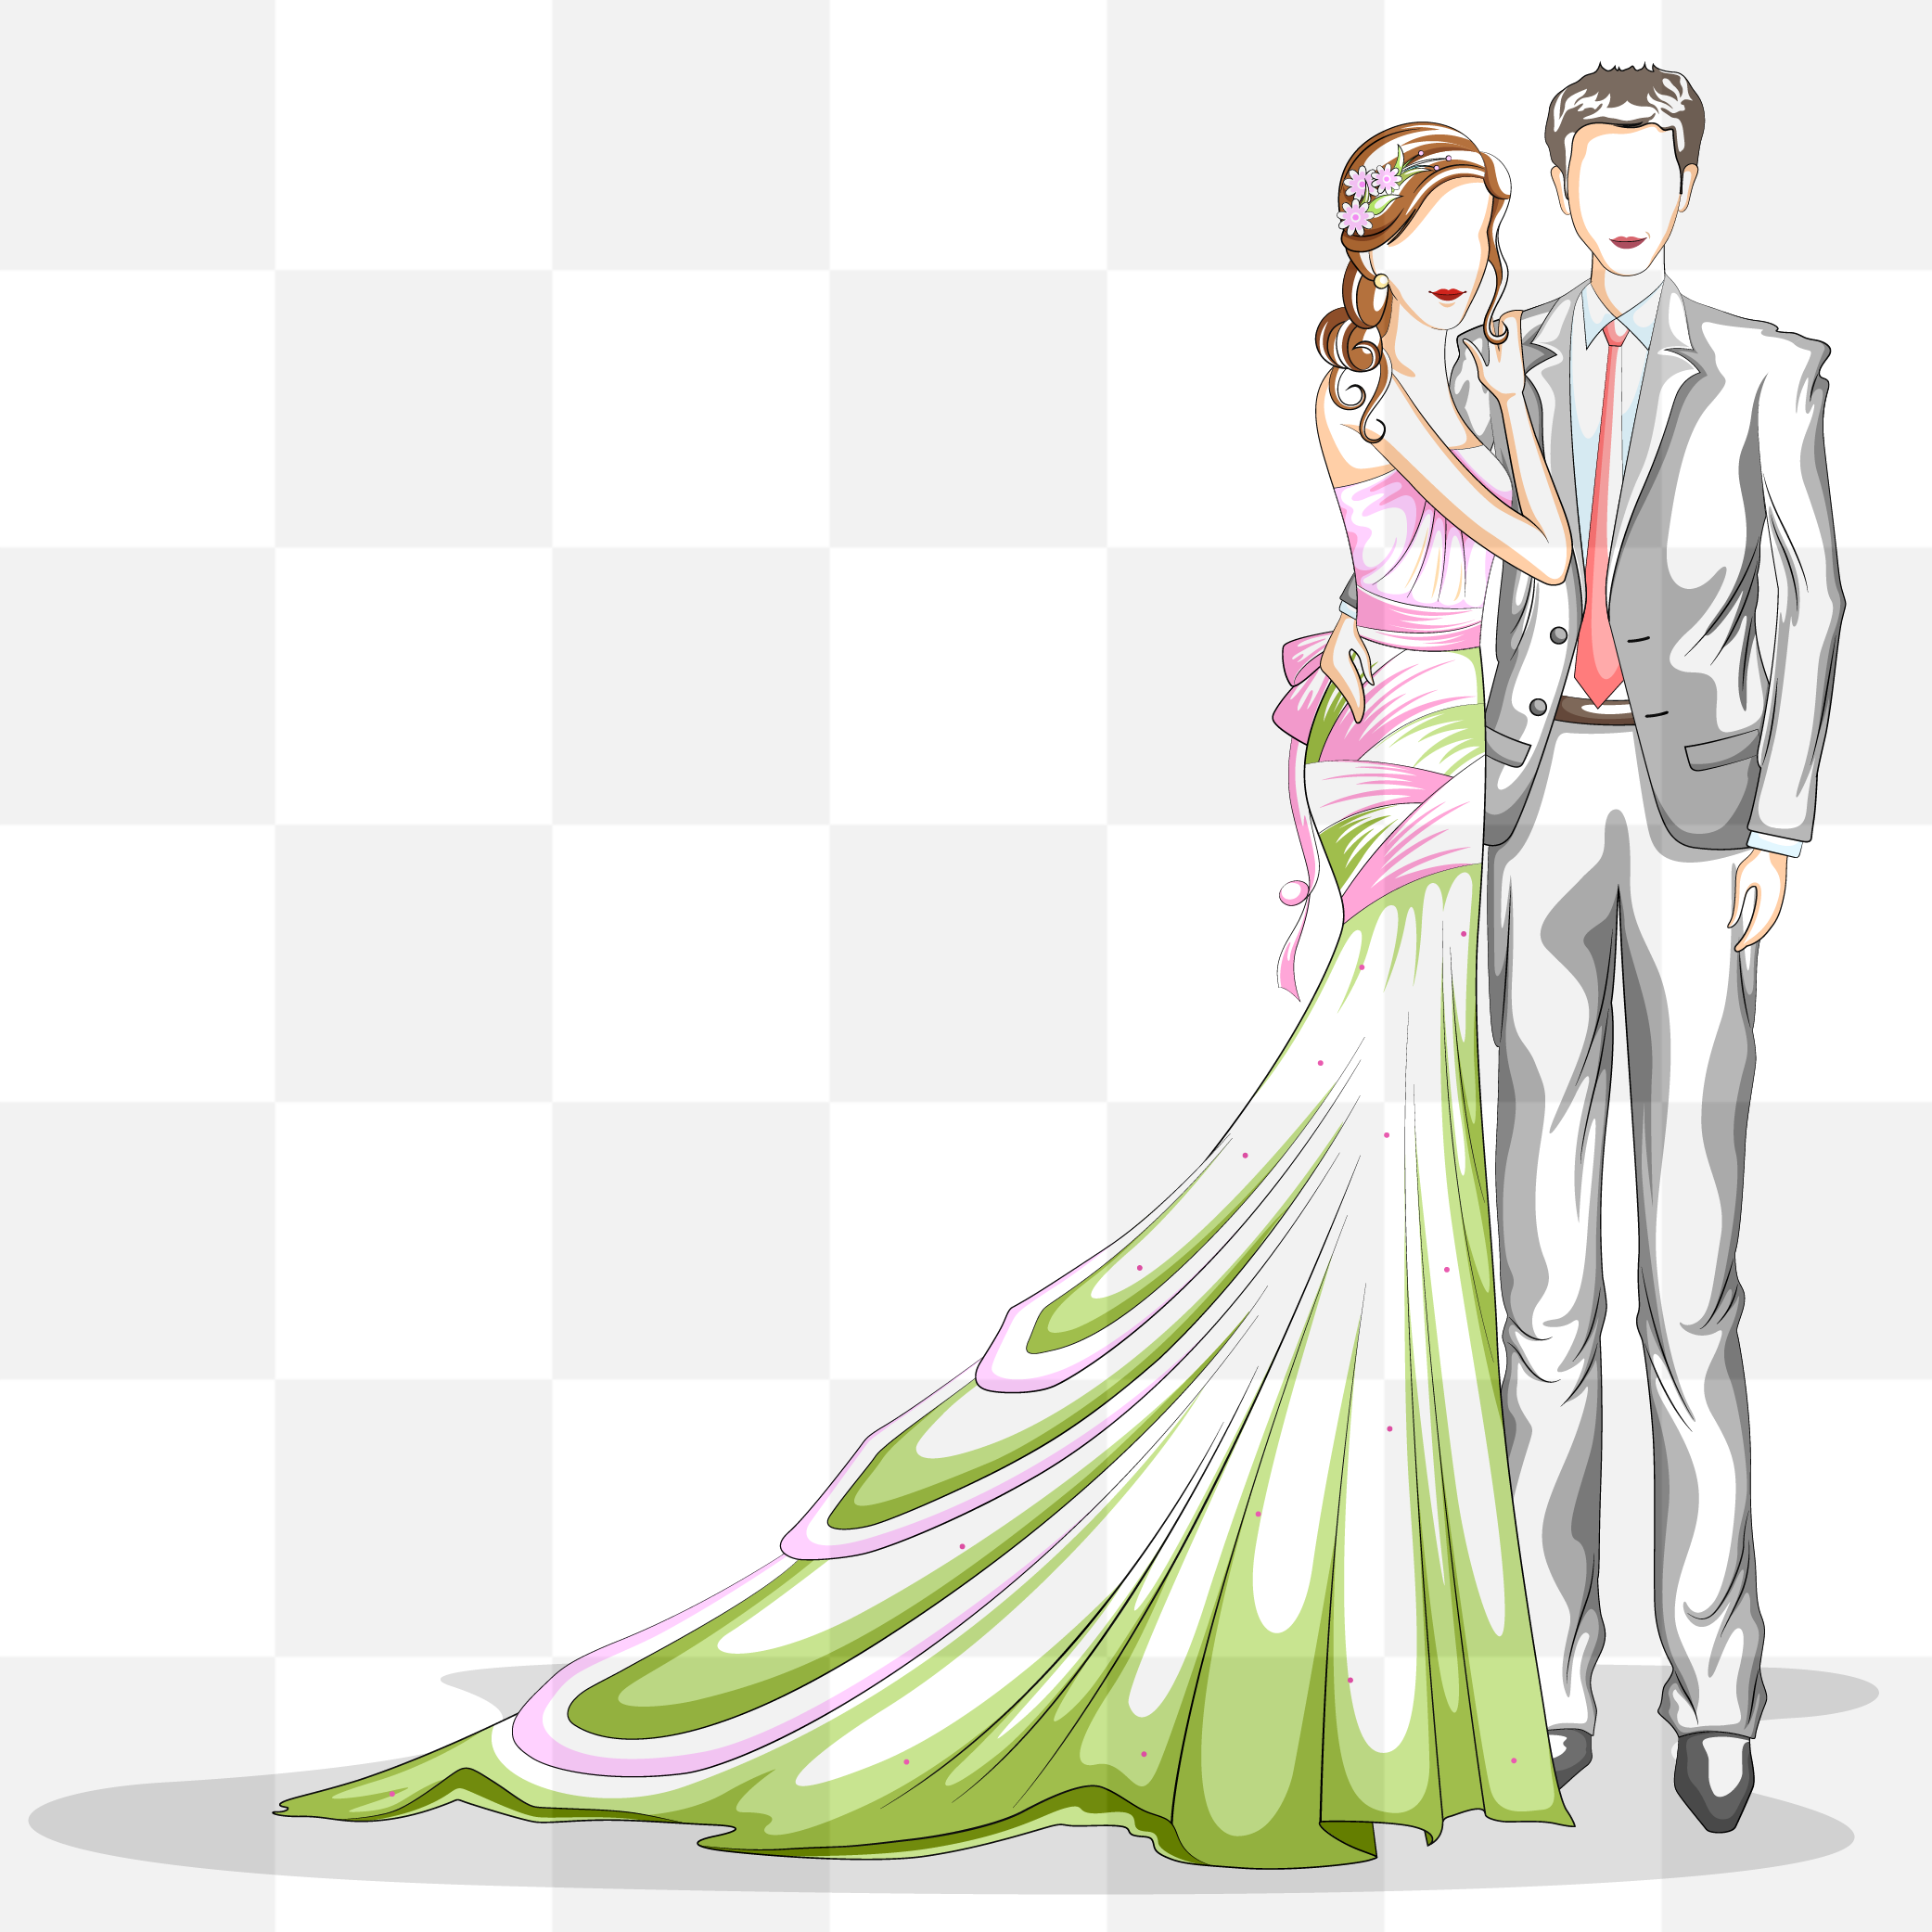 2083 x 2083 px on this site. Wedding couple cartoon PNG. Bride and groom cartoon  PNG. Happiness. Wishing you lots of love and happiness. Wedding couple PNG.  We're so happy for you.